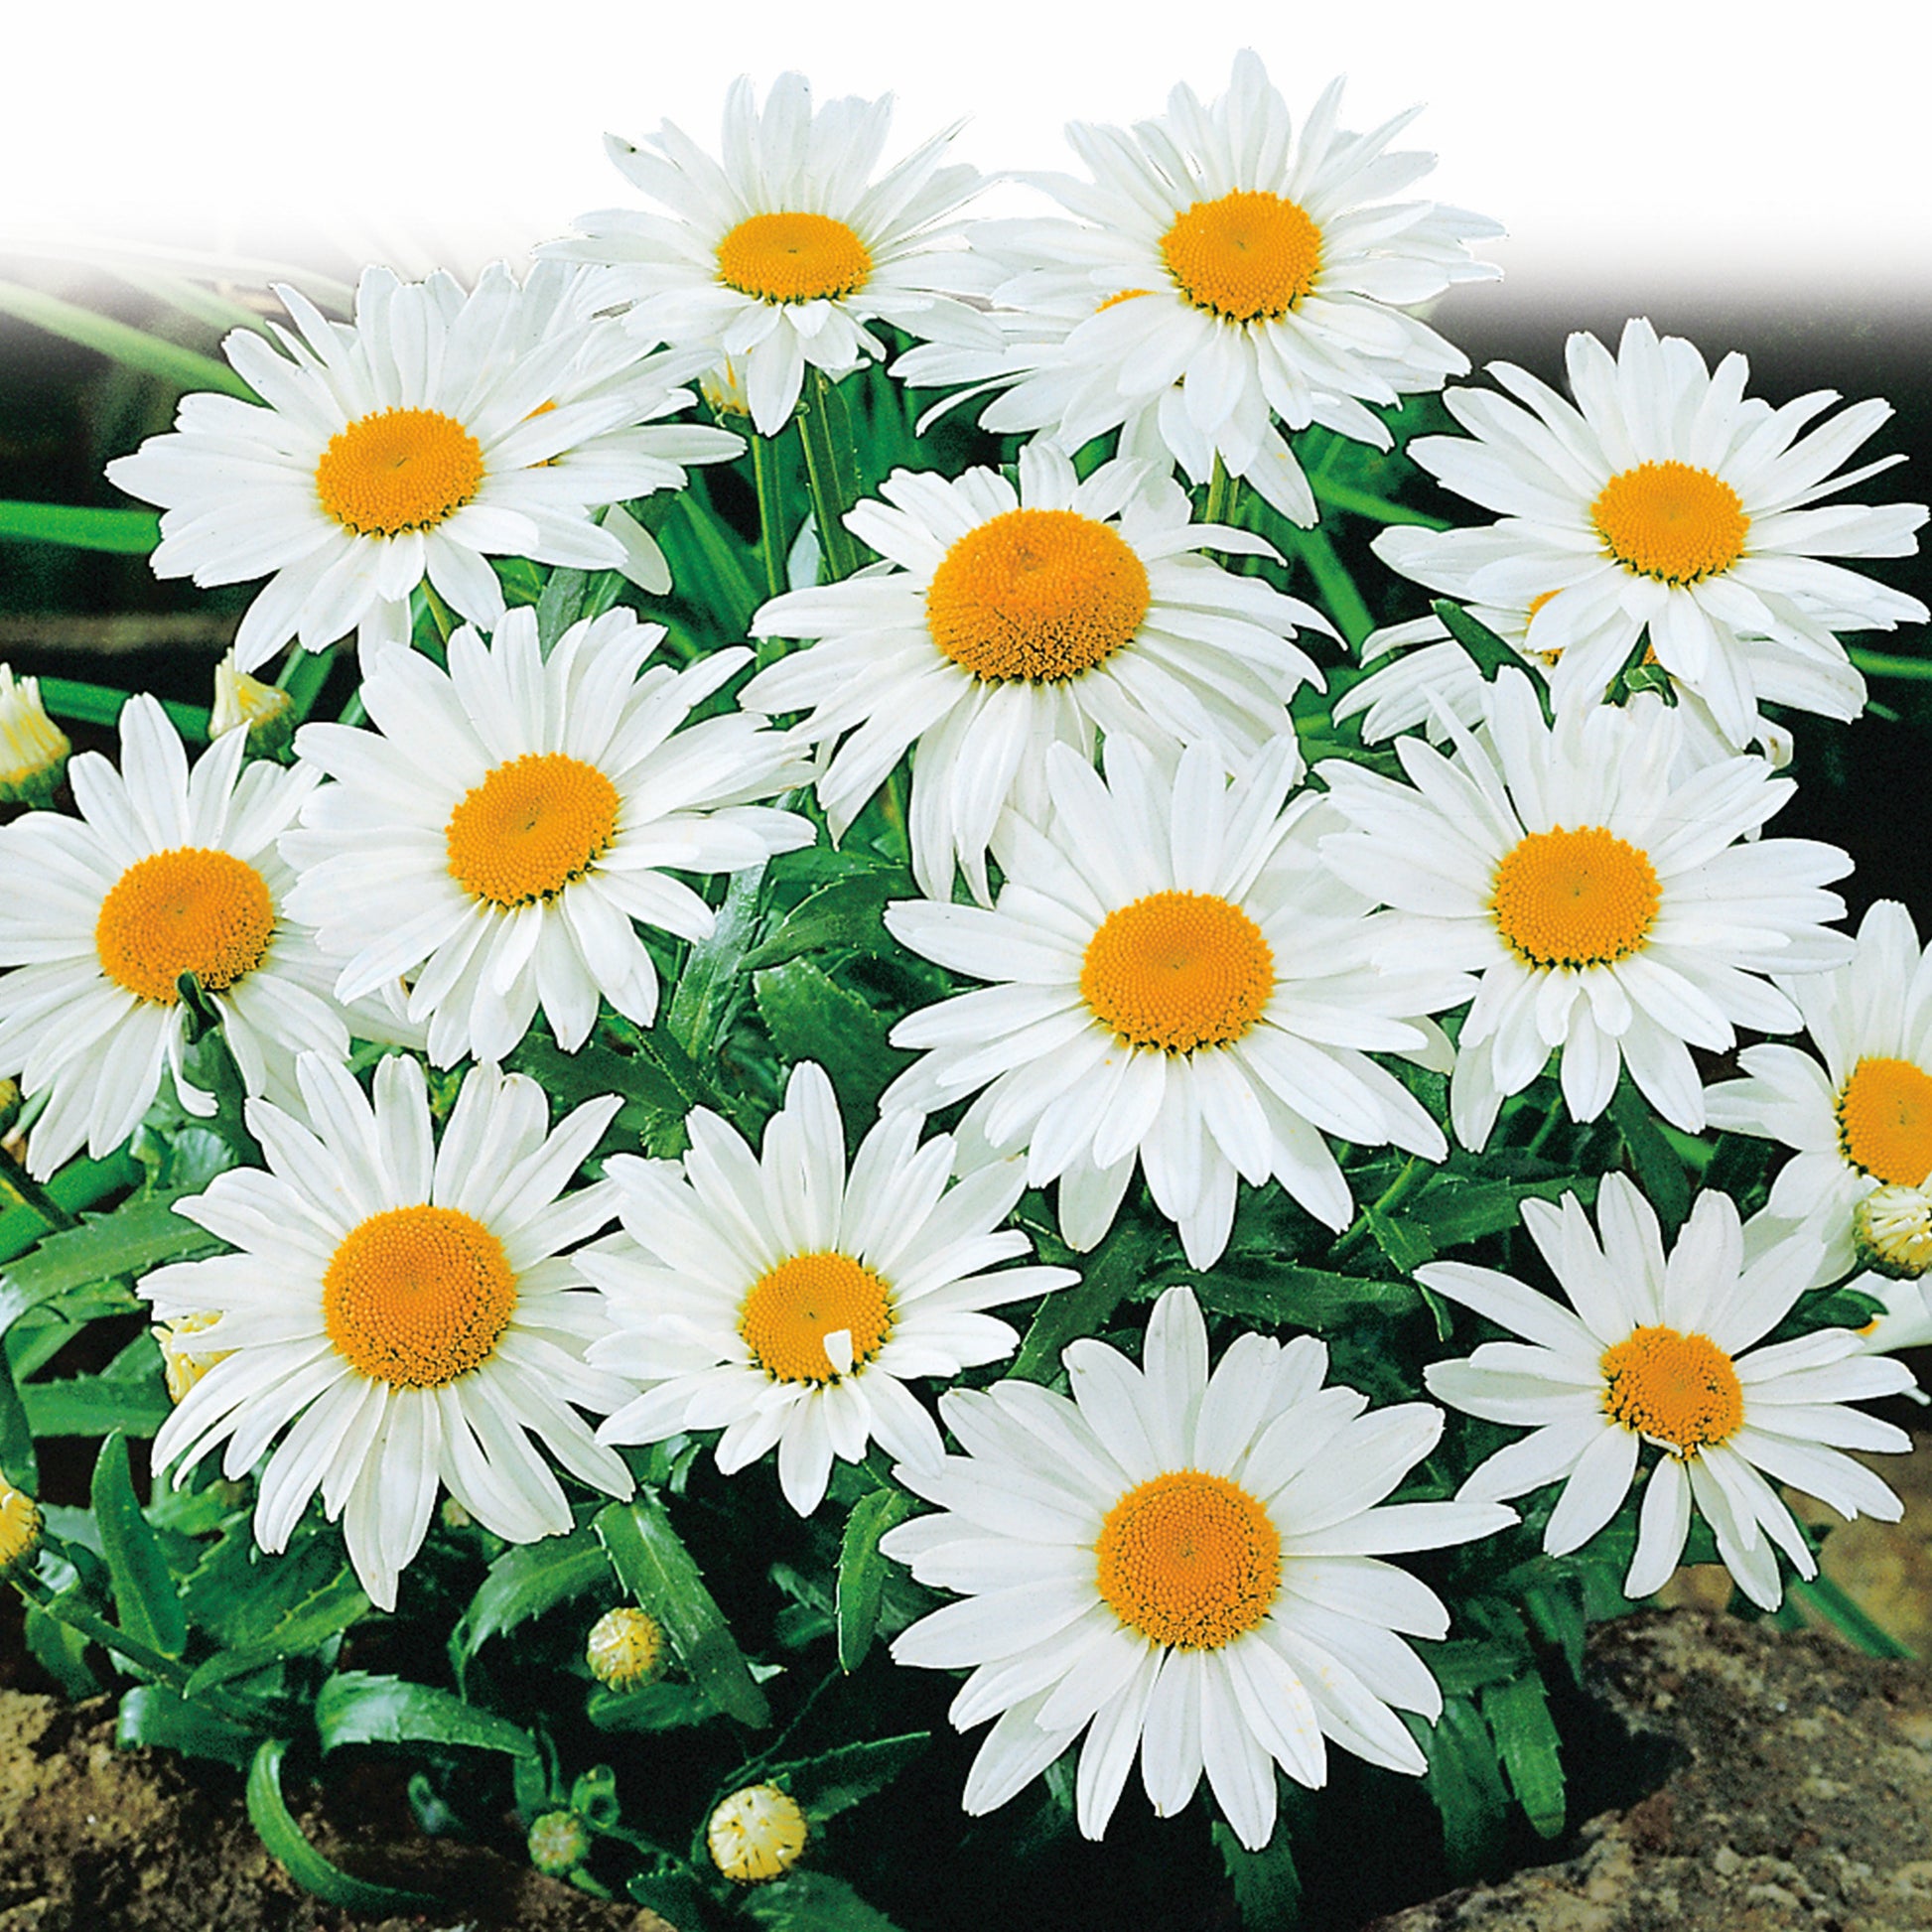 Shasta Daisy Seeds fully grown, matured and blooming their gorgeous white petals with buttery yellow center.